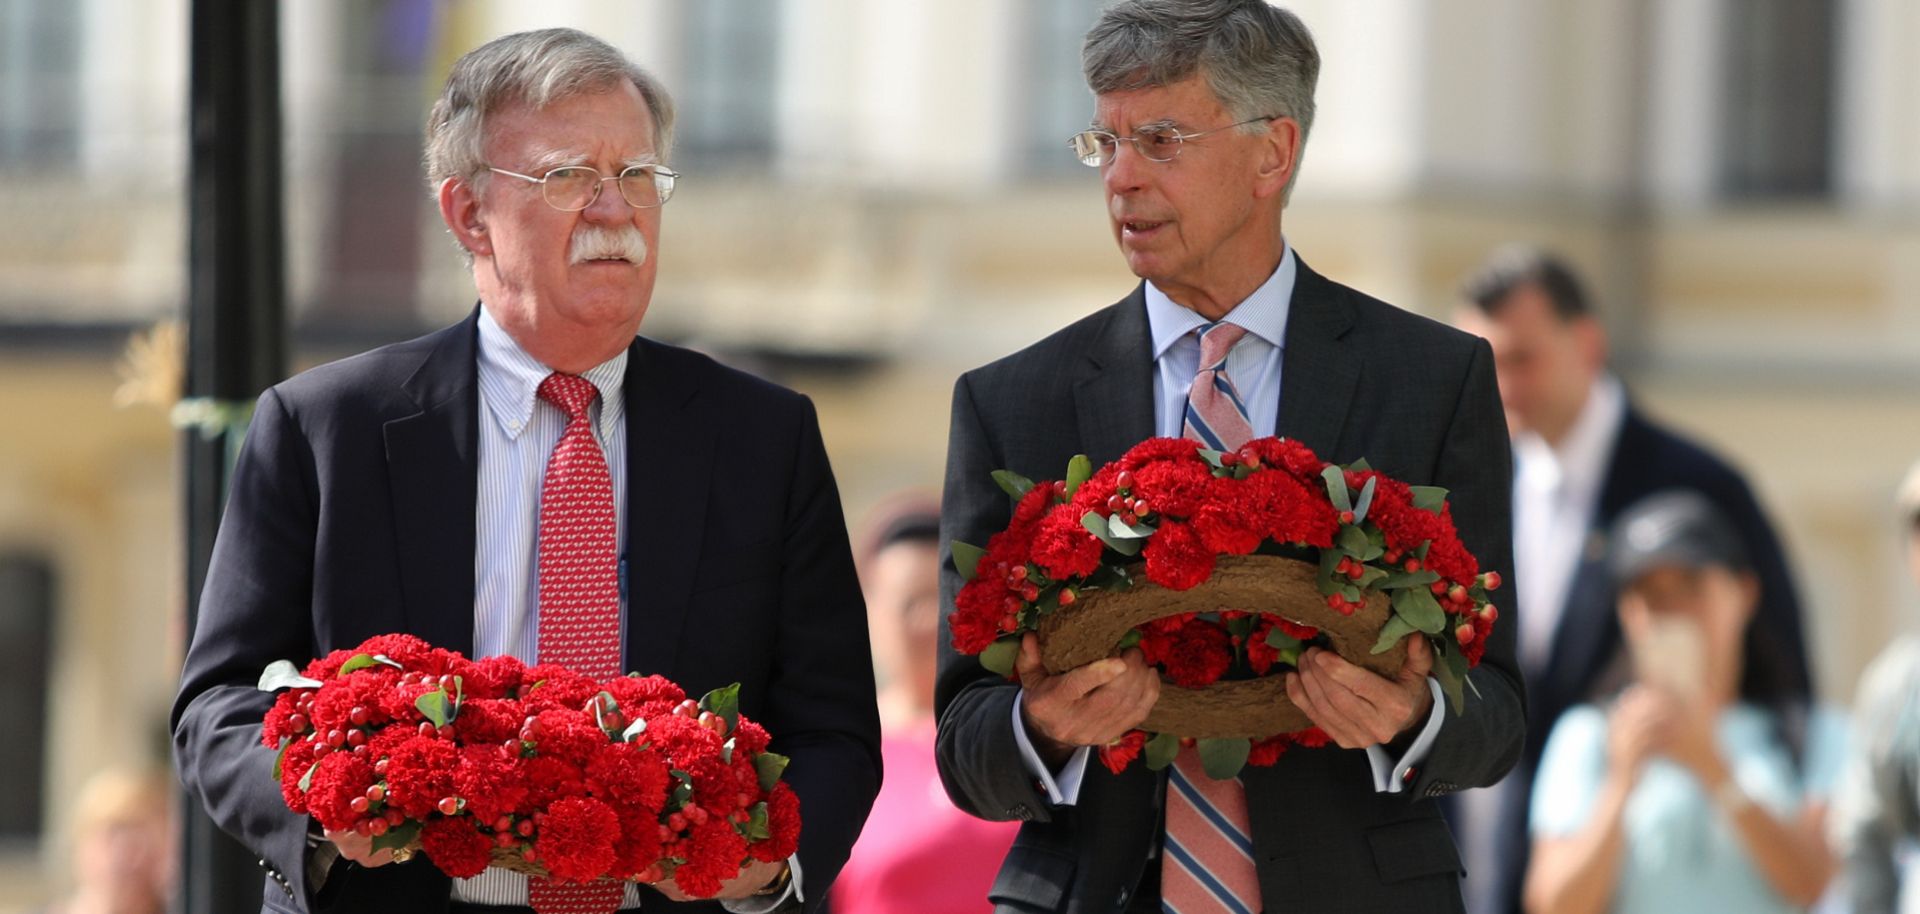 U.S. national security adviser John Bolton (L) and U.S. Ambassador to Ukraine William Taylor prepare to lay flowers commemorating Ukrainian soldiers who died in eastern Ukraine during a visit to Kyiv on Aug. 27, 2019.